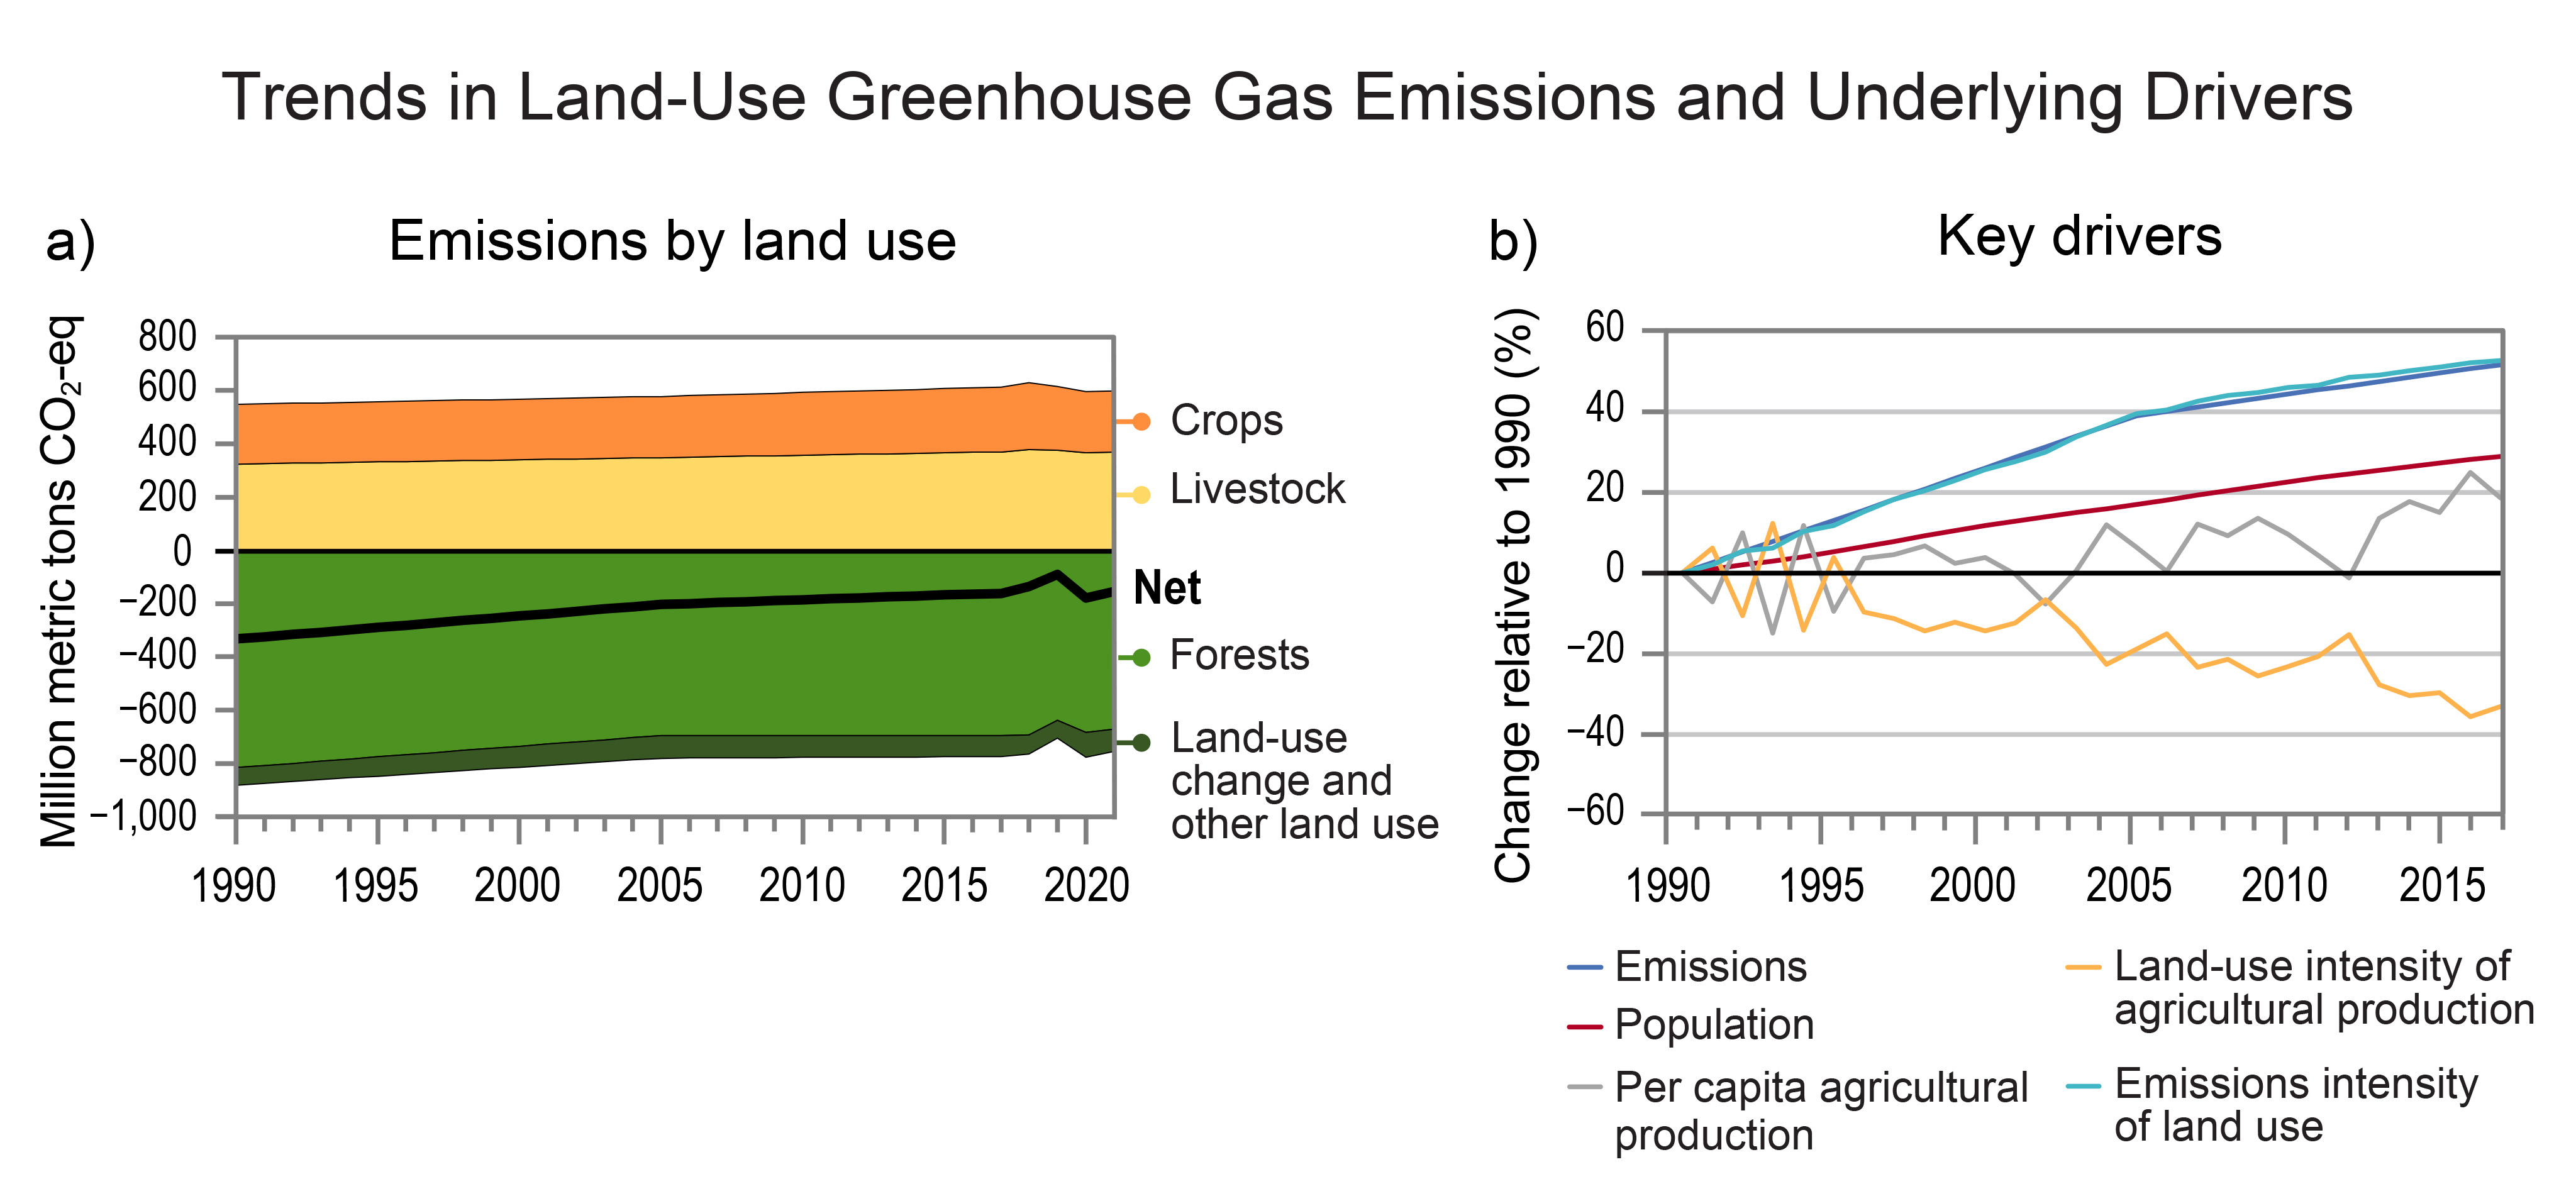 Trends in Land-Use Greenhouse Gas Emissions and Underlying Drivers